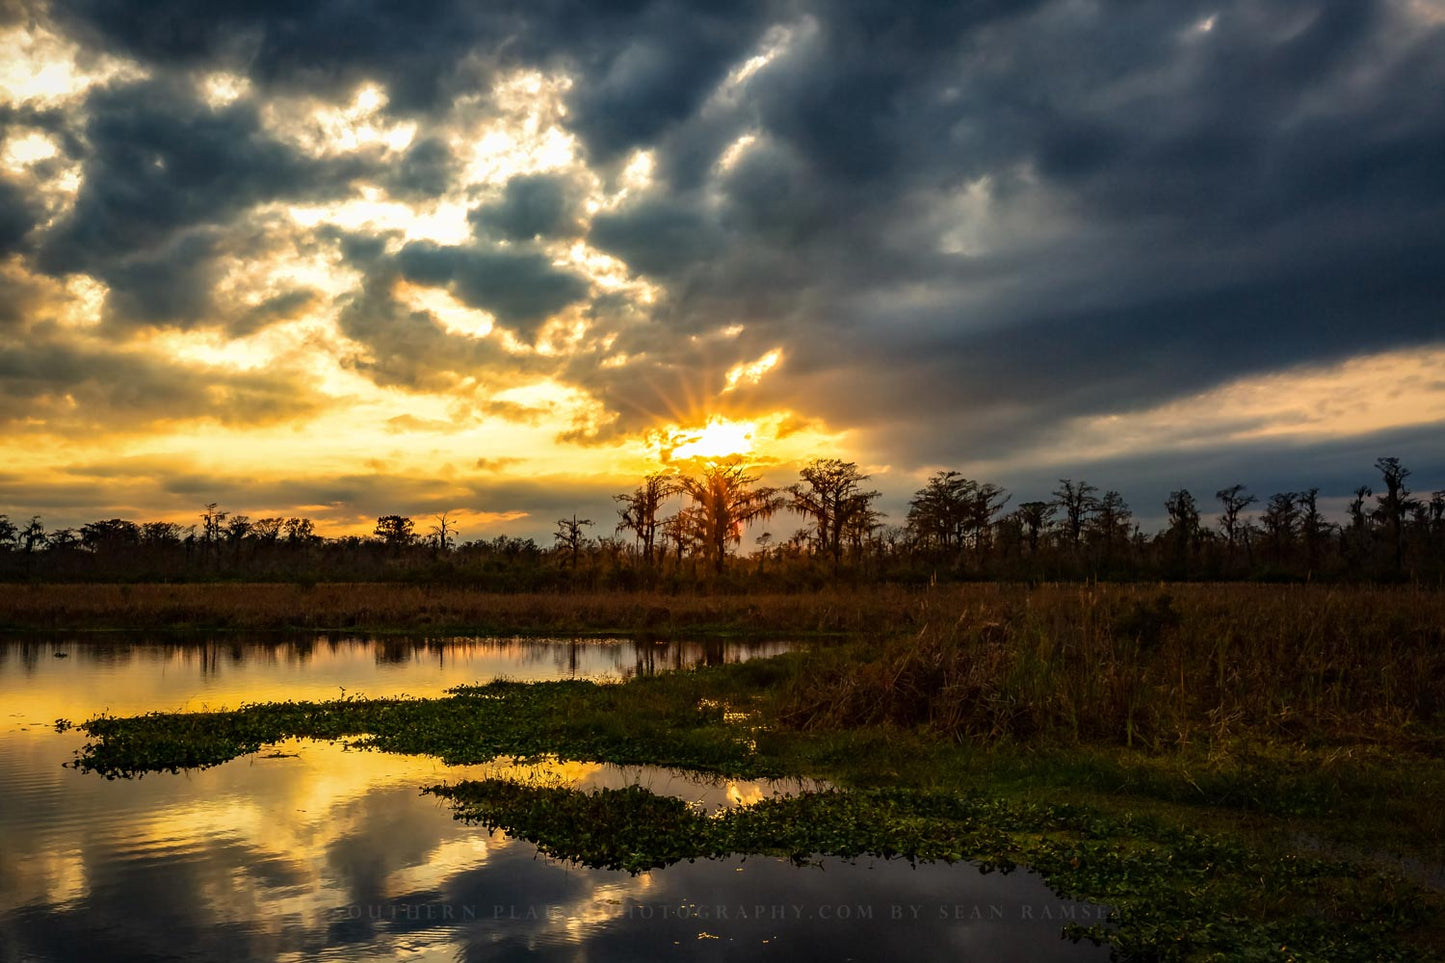 Swamp photography print of a golden sunset over a bayou on a winter evening near Houma, Louisiana by Sean Ramsey of Southern Plains Photography.